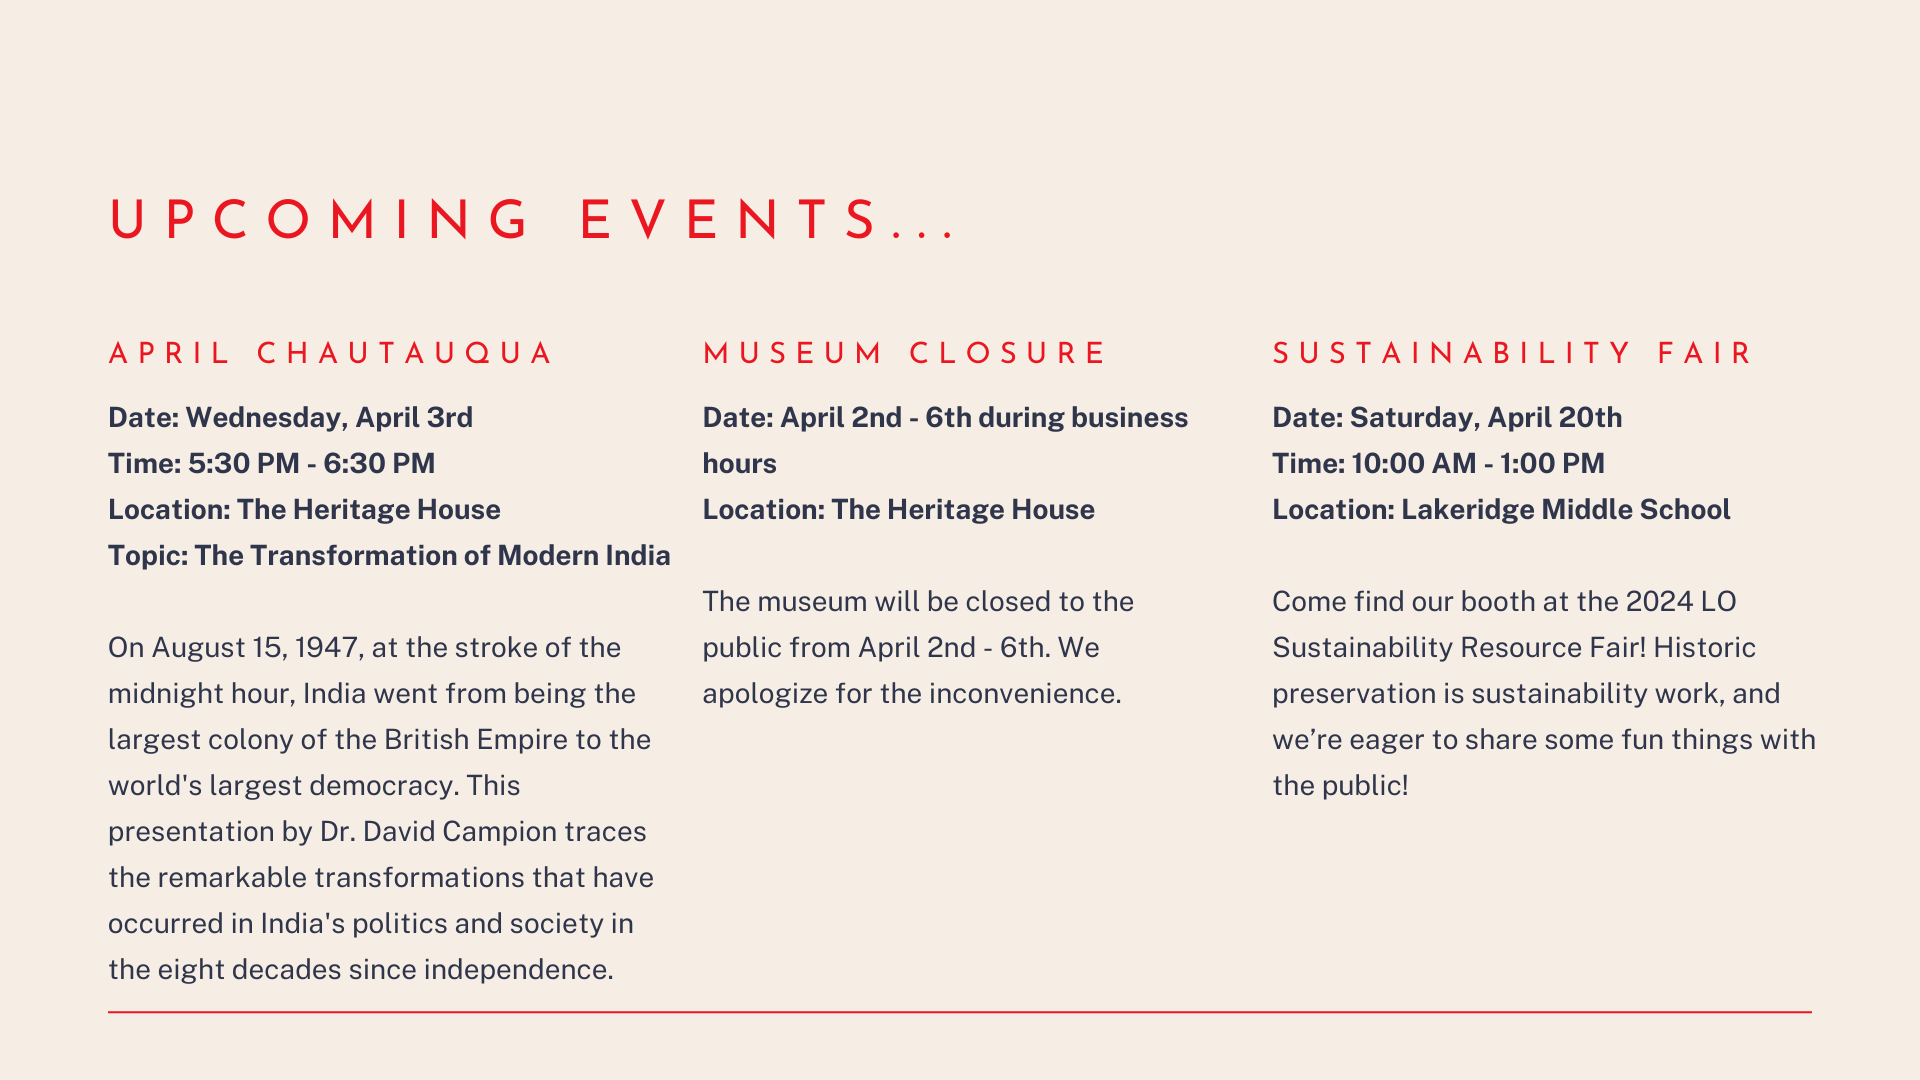 Upcoming events include the April Chautauqua on Wednesday, April 3rd, Museum closure from April 2nd - 6th, and the Sustainability Fair on Saturday, April 20th.